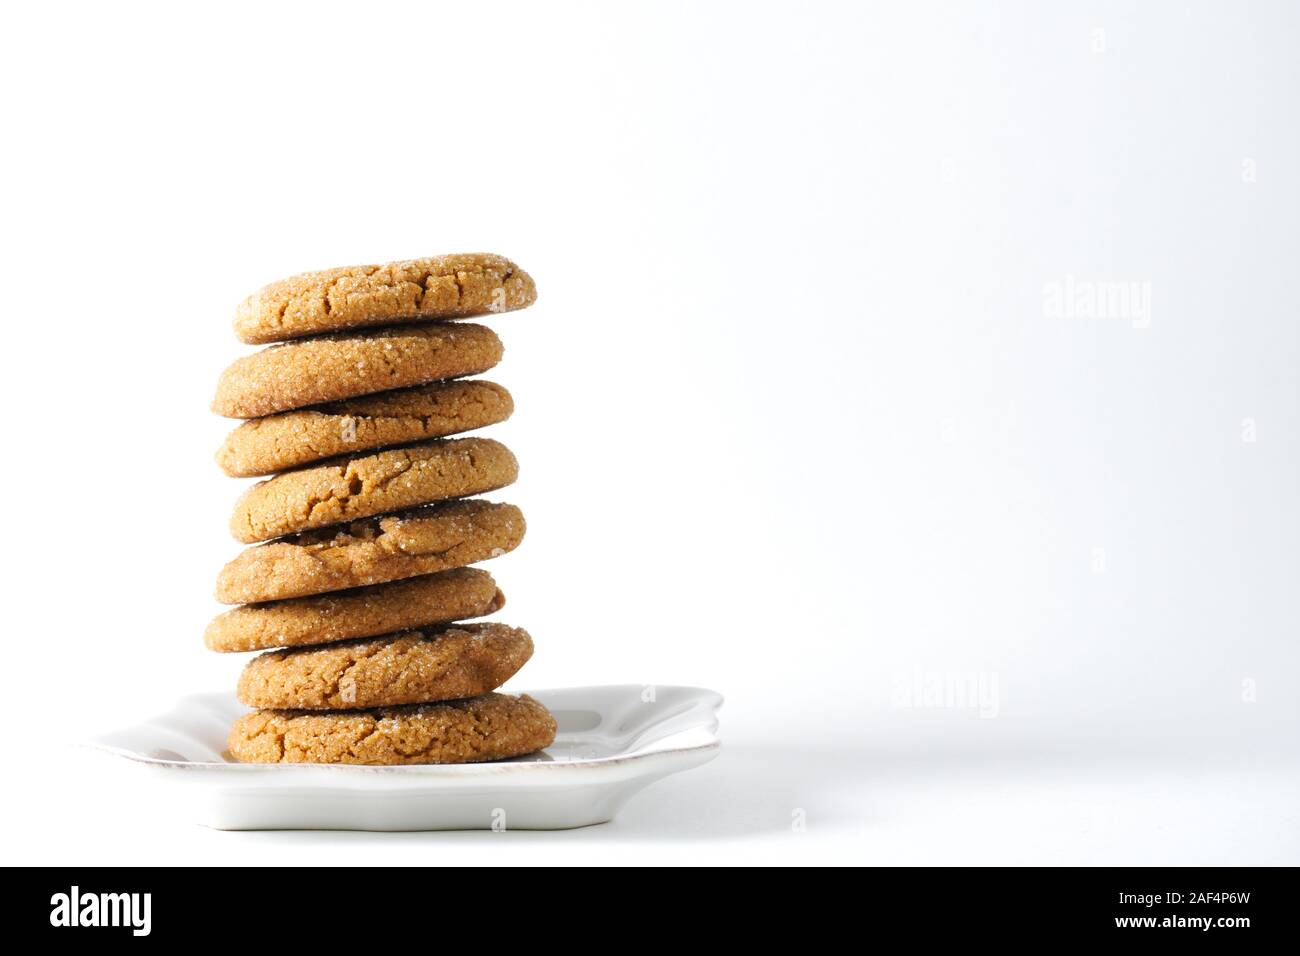 A pile of ginger cookies on a white plate with a white background and copy space on the right Stock Photo